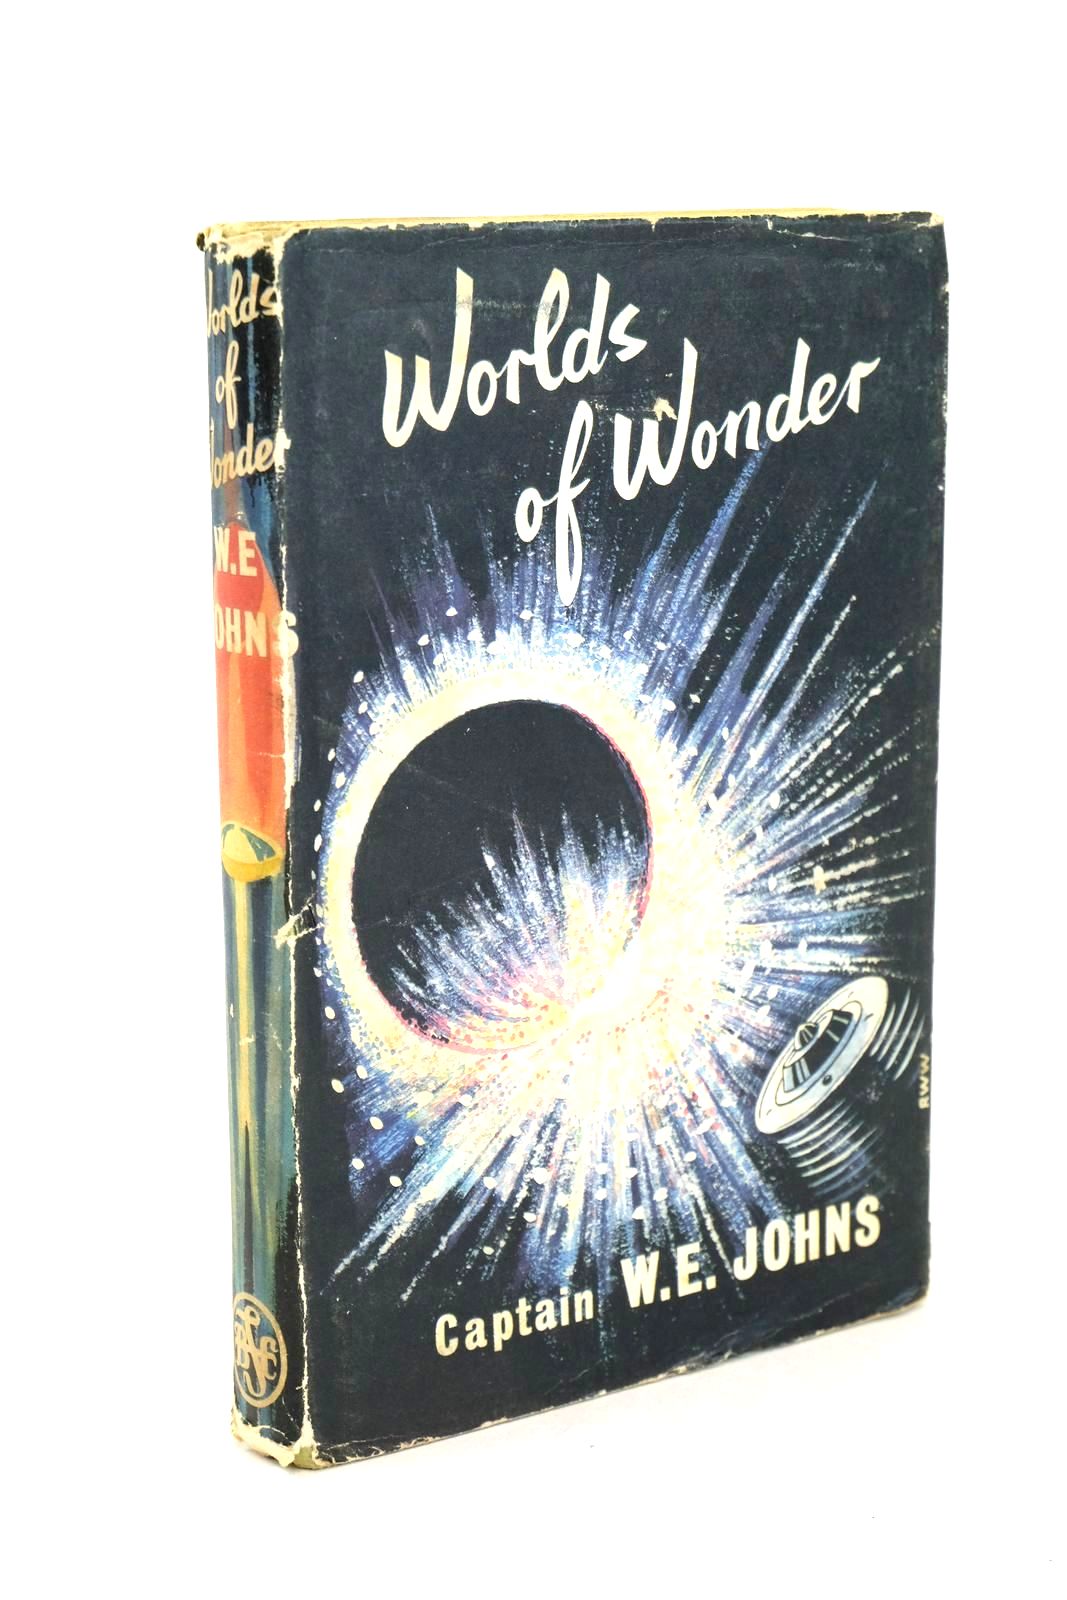 Photo of WORLDS OF WONDER- Stock Number: 1326197